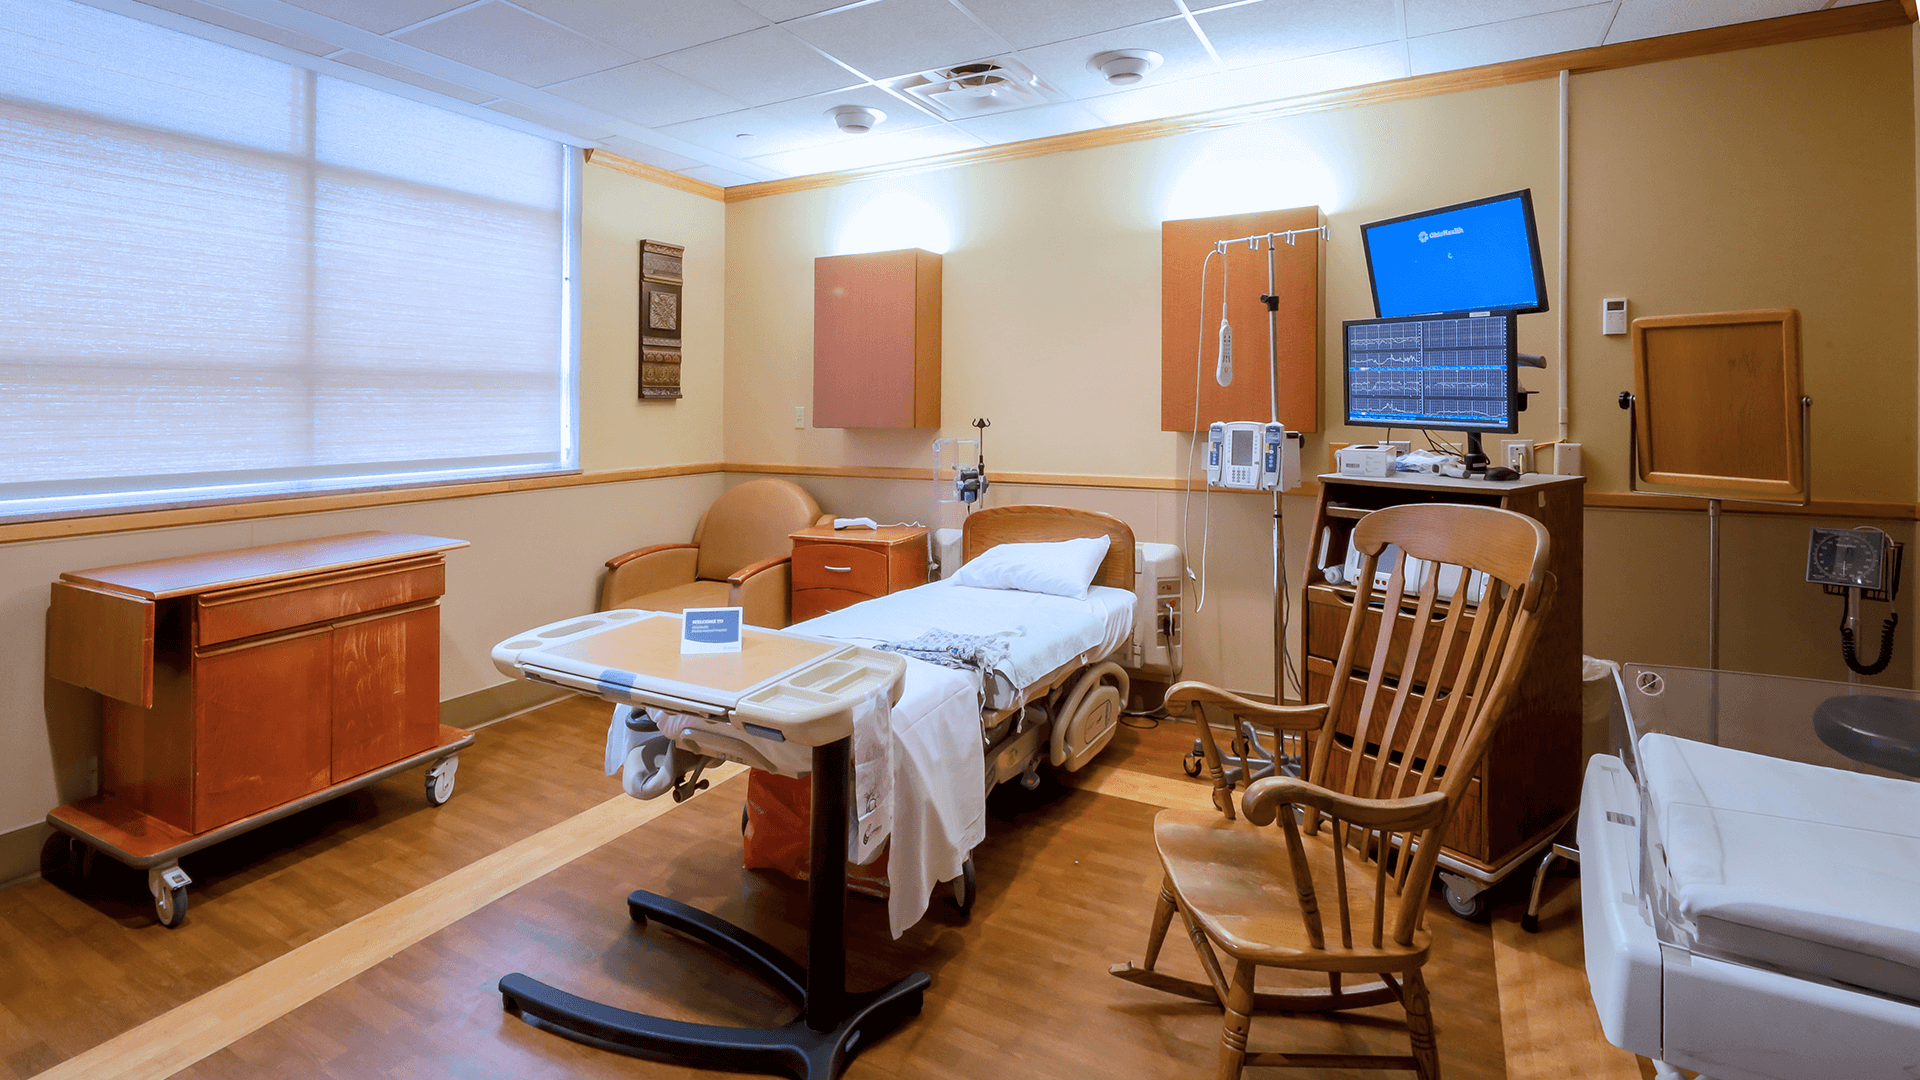 Hospital labor and delivery room